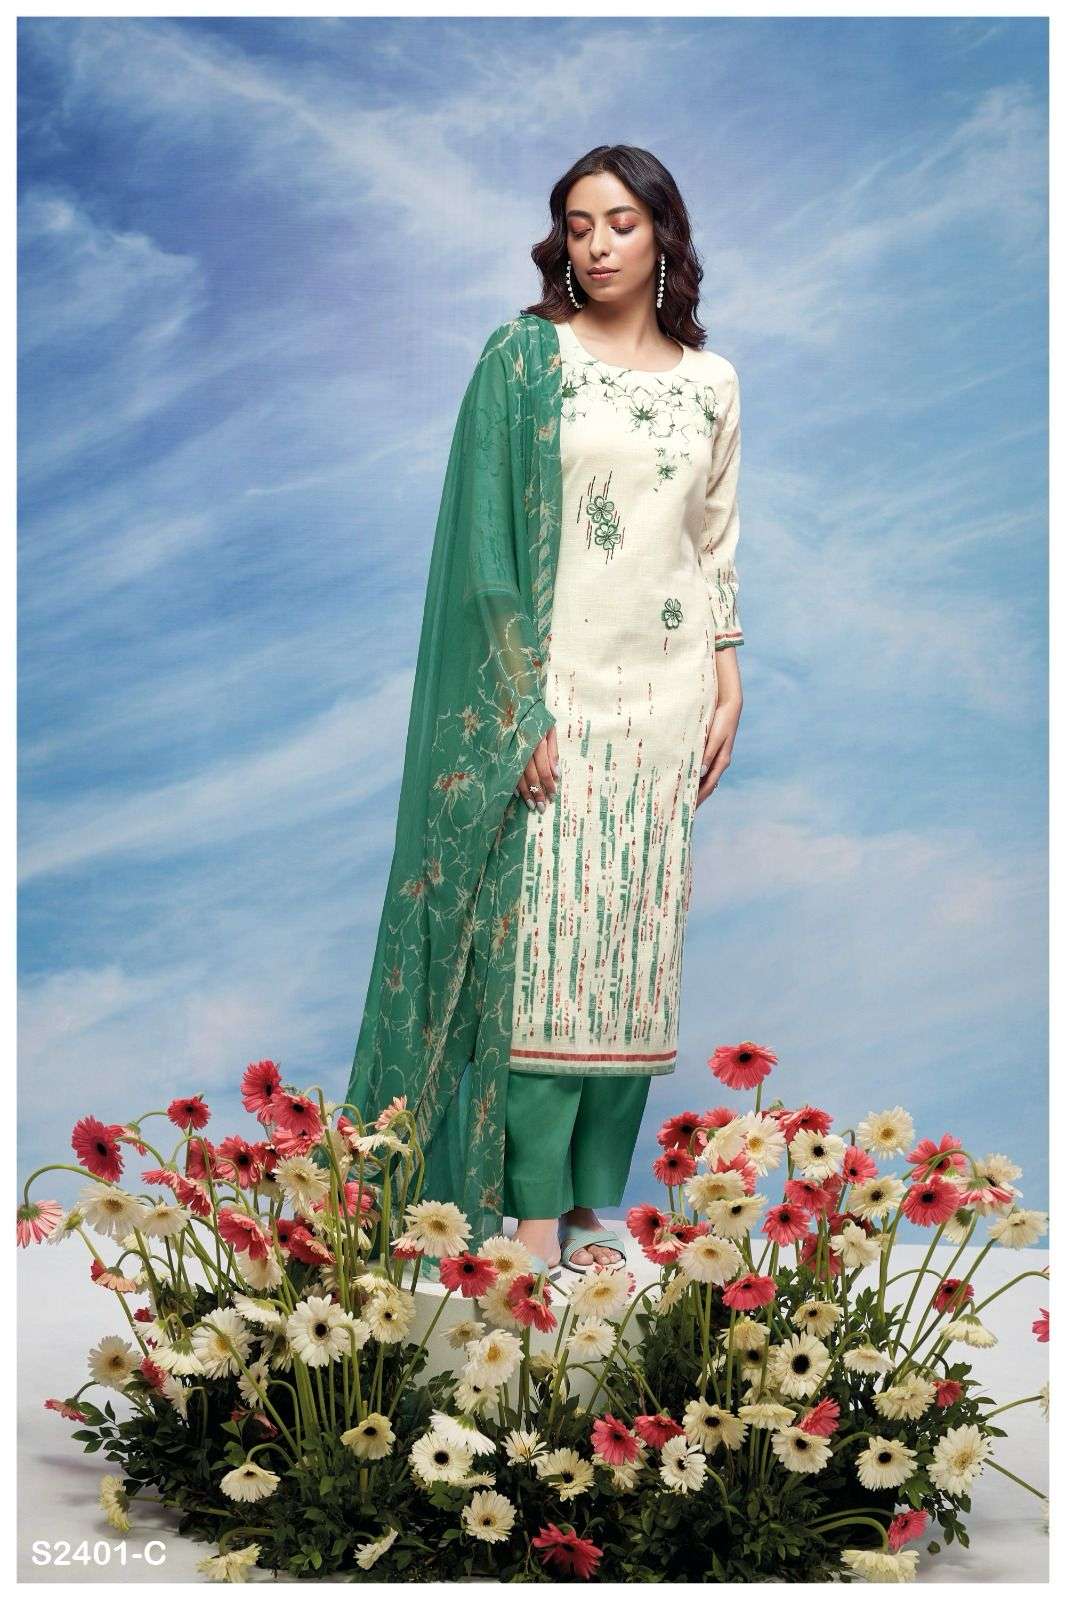 Ganga Netima 2401 Exclusive Cotton Suit Branded Collection